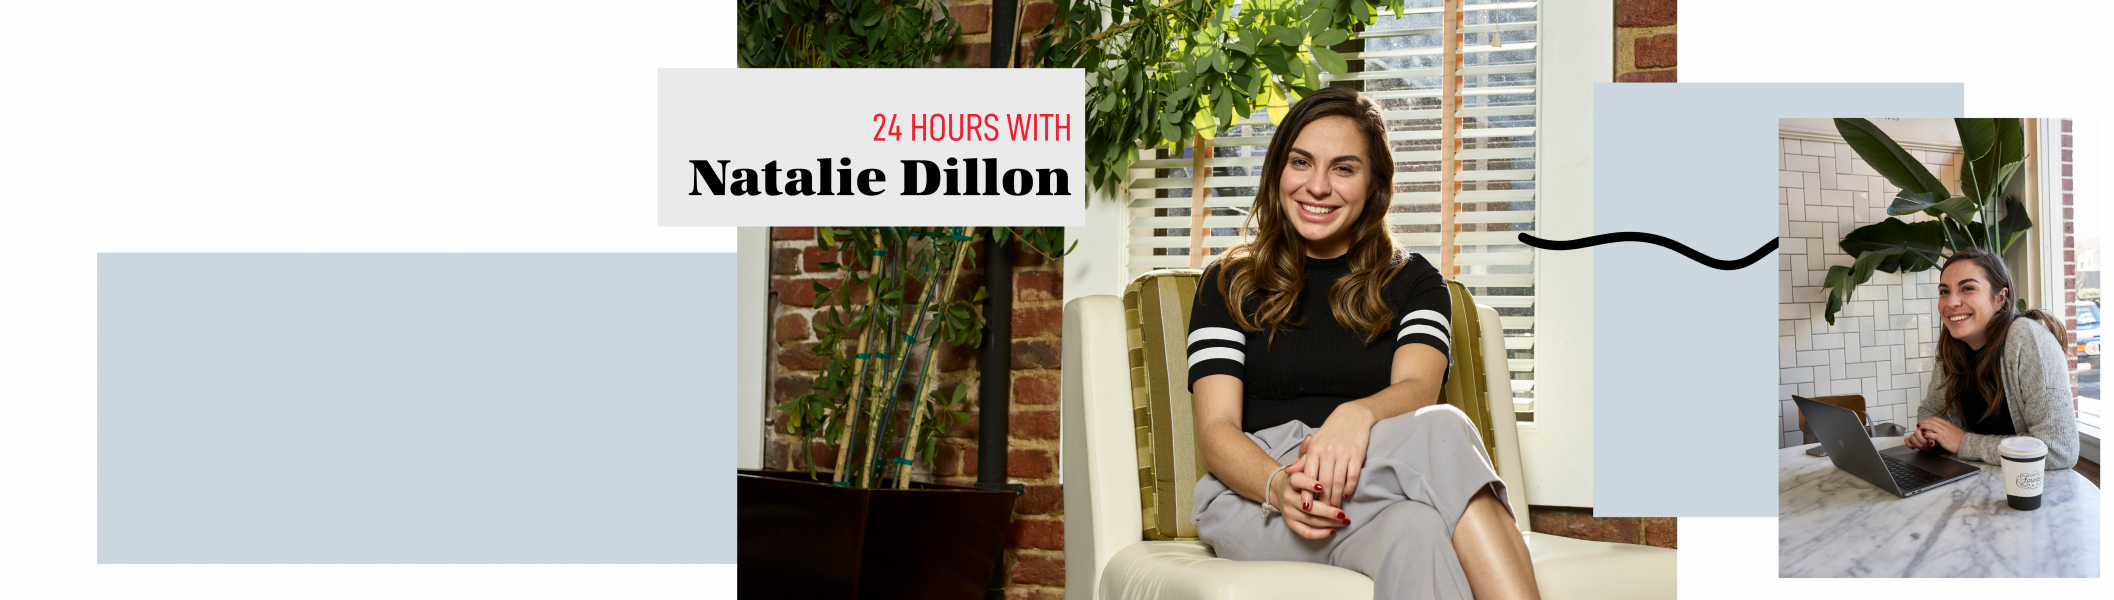 24 Hours with Natalie Dillon | BAM Communications